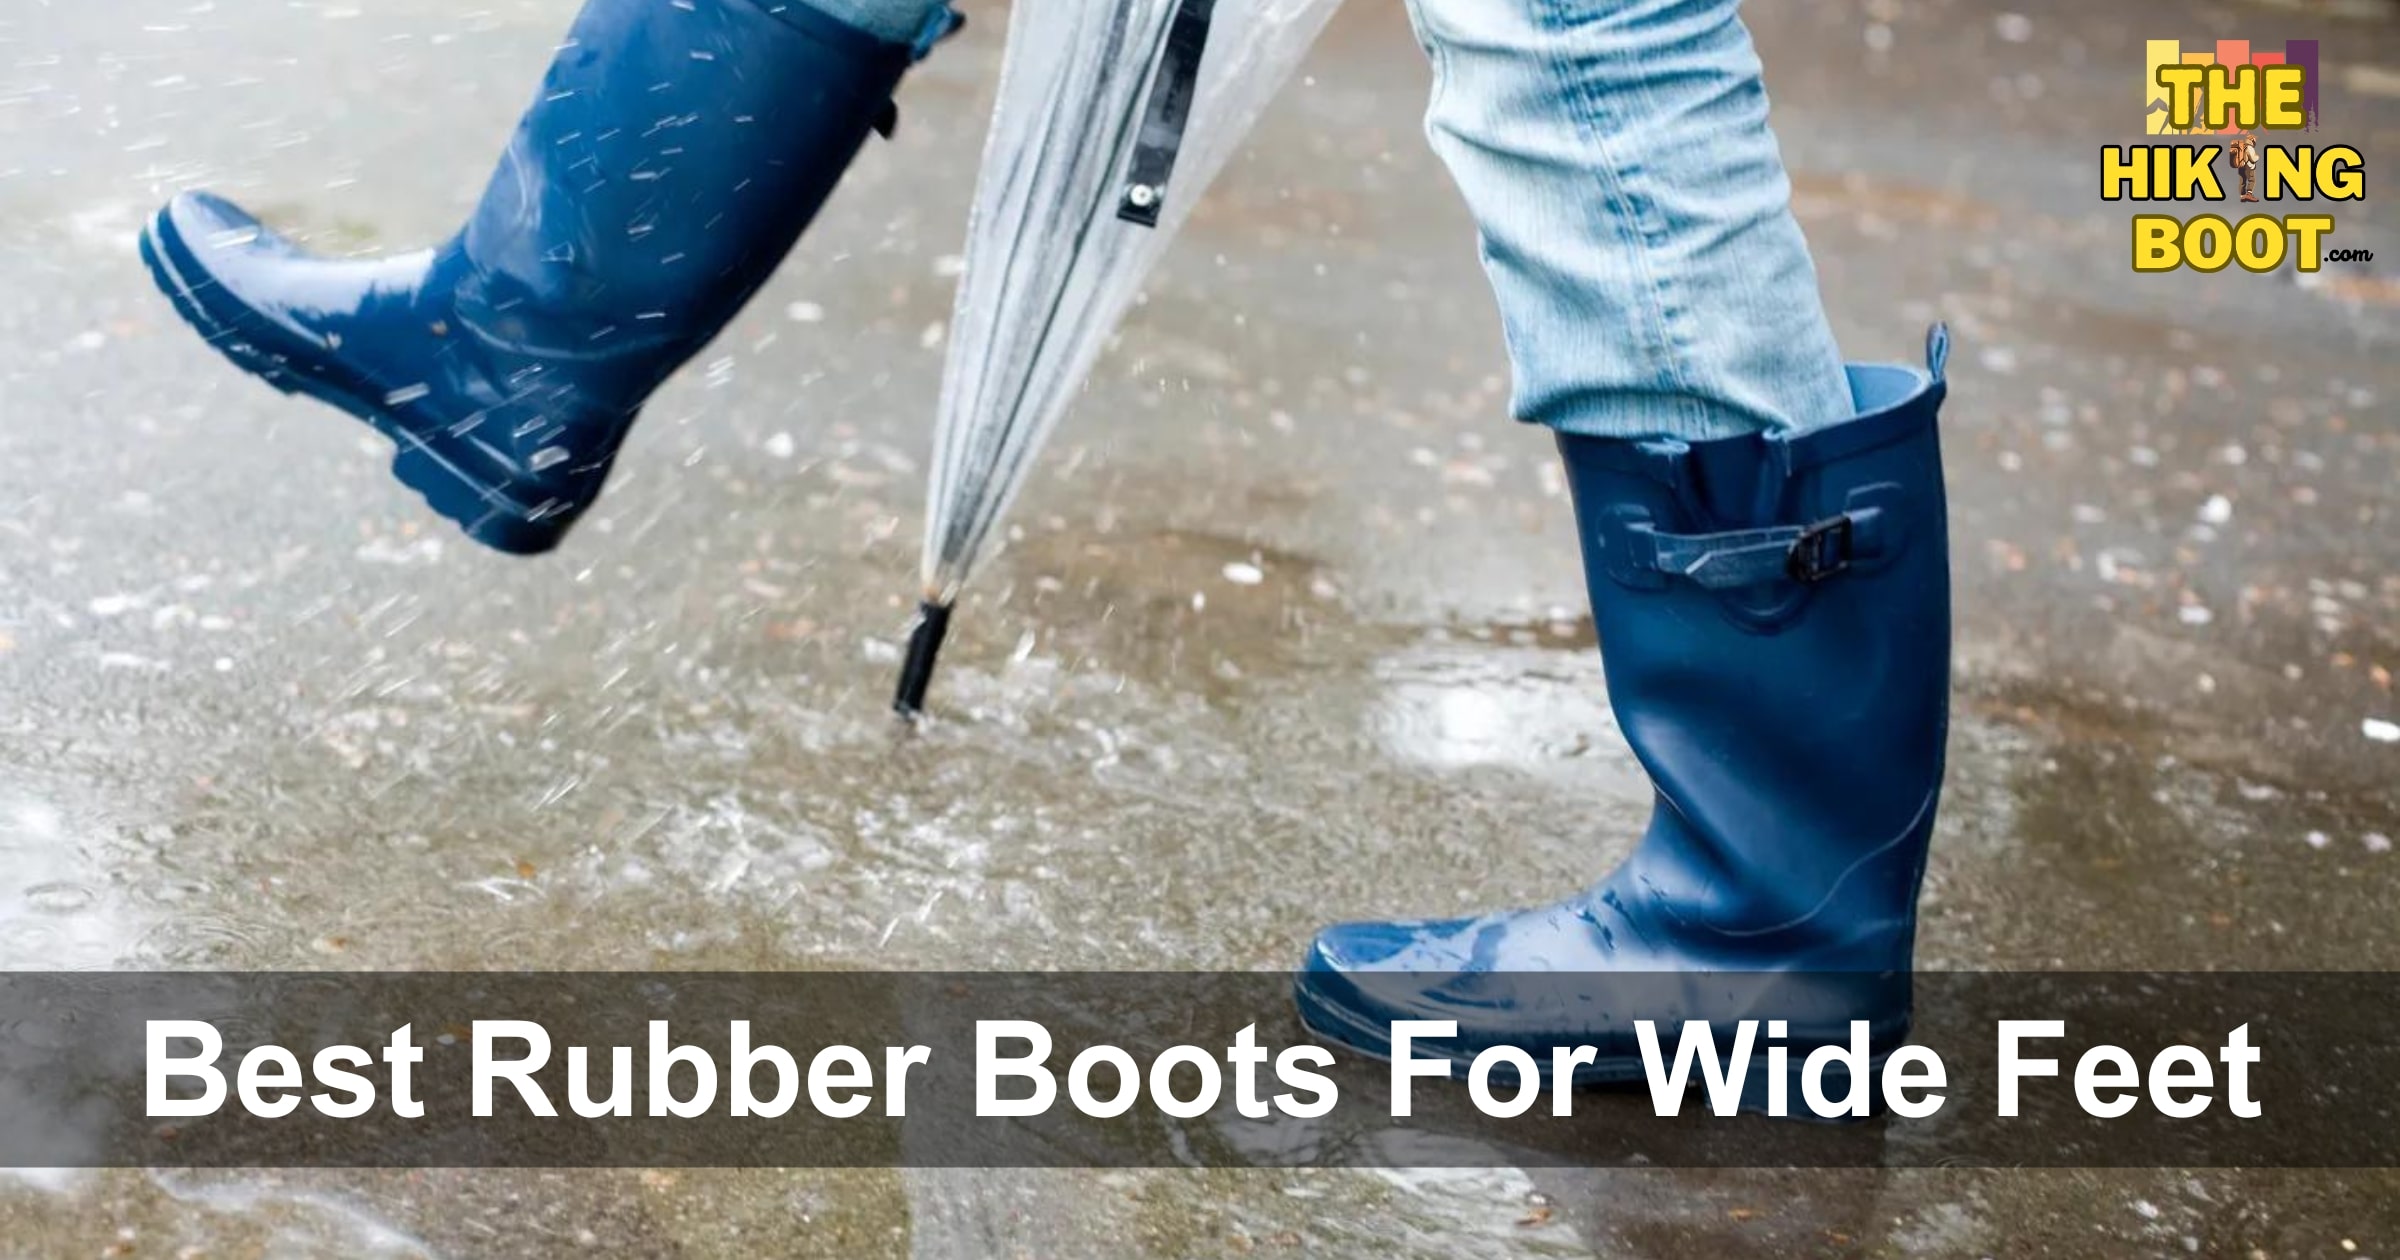 5 Best Rubber Boots For Wide Feet | Benefits of Wearing